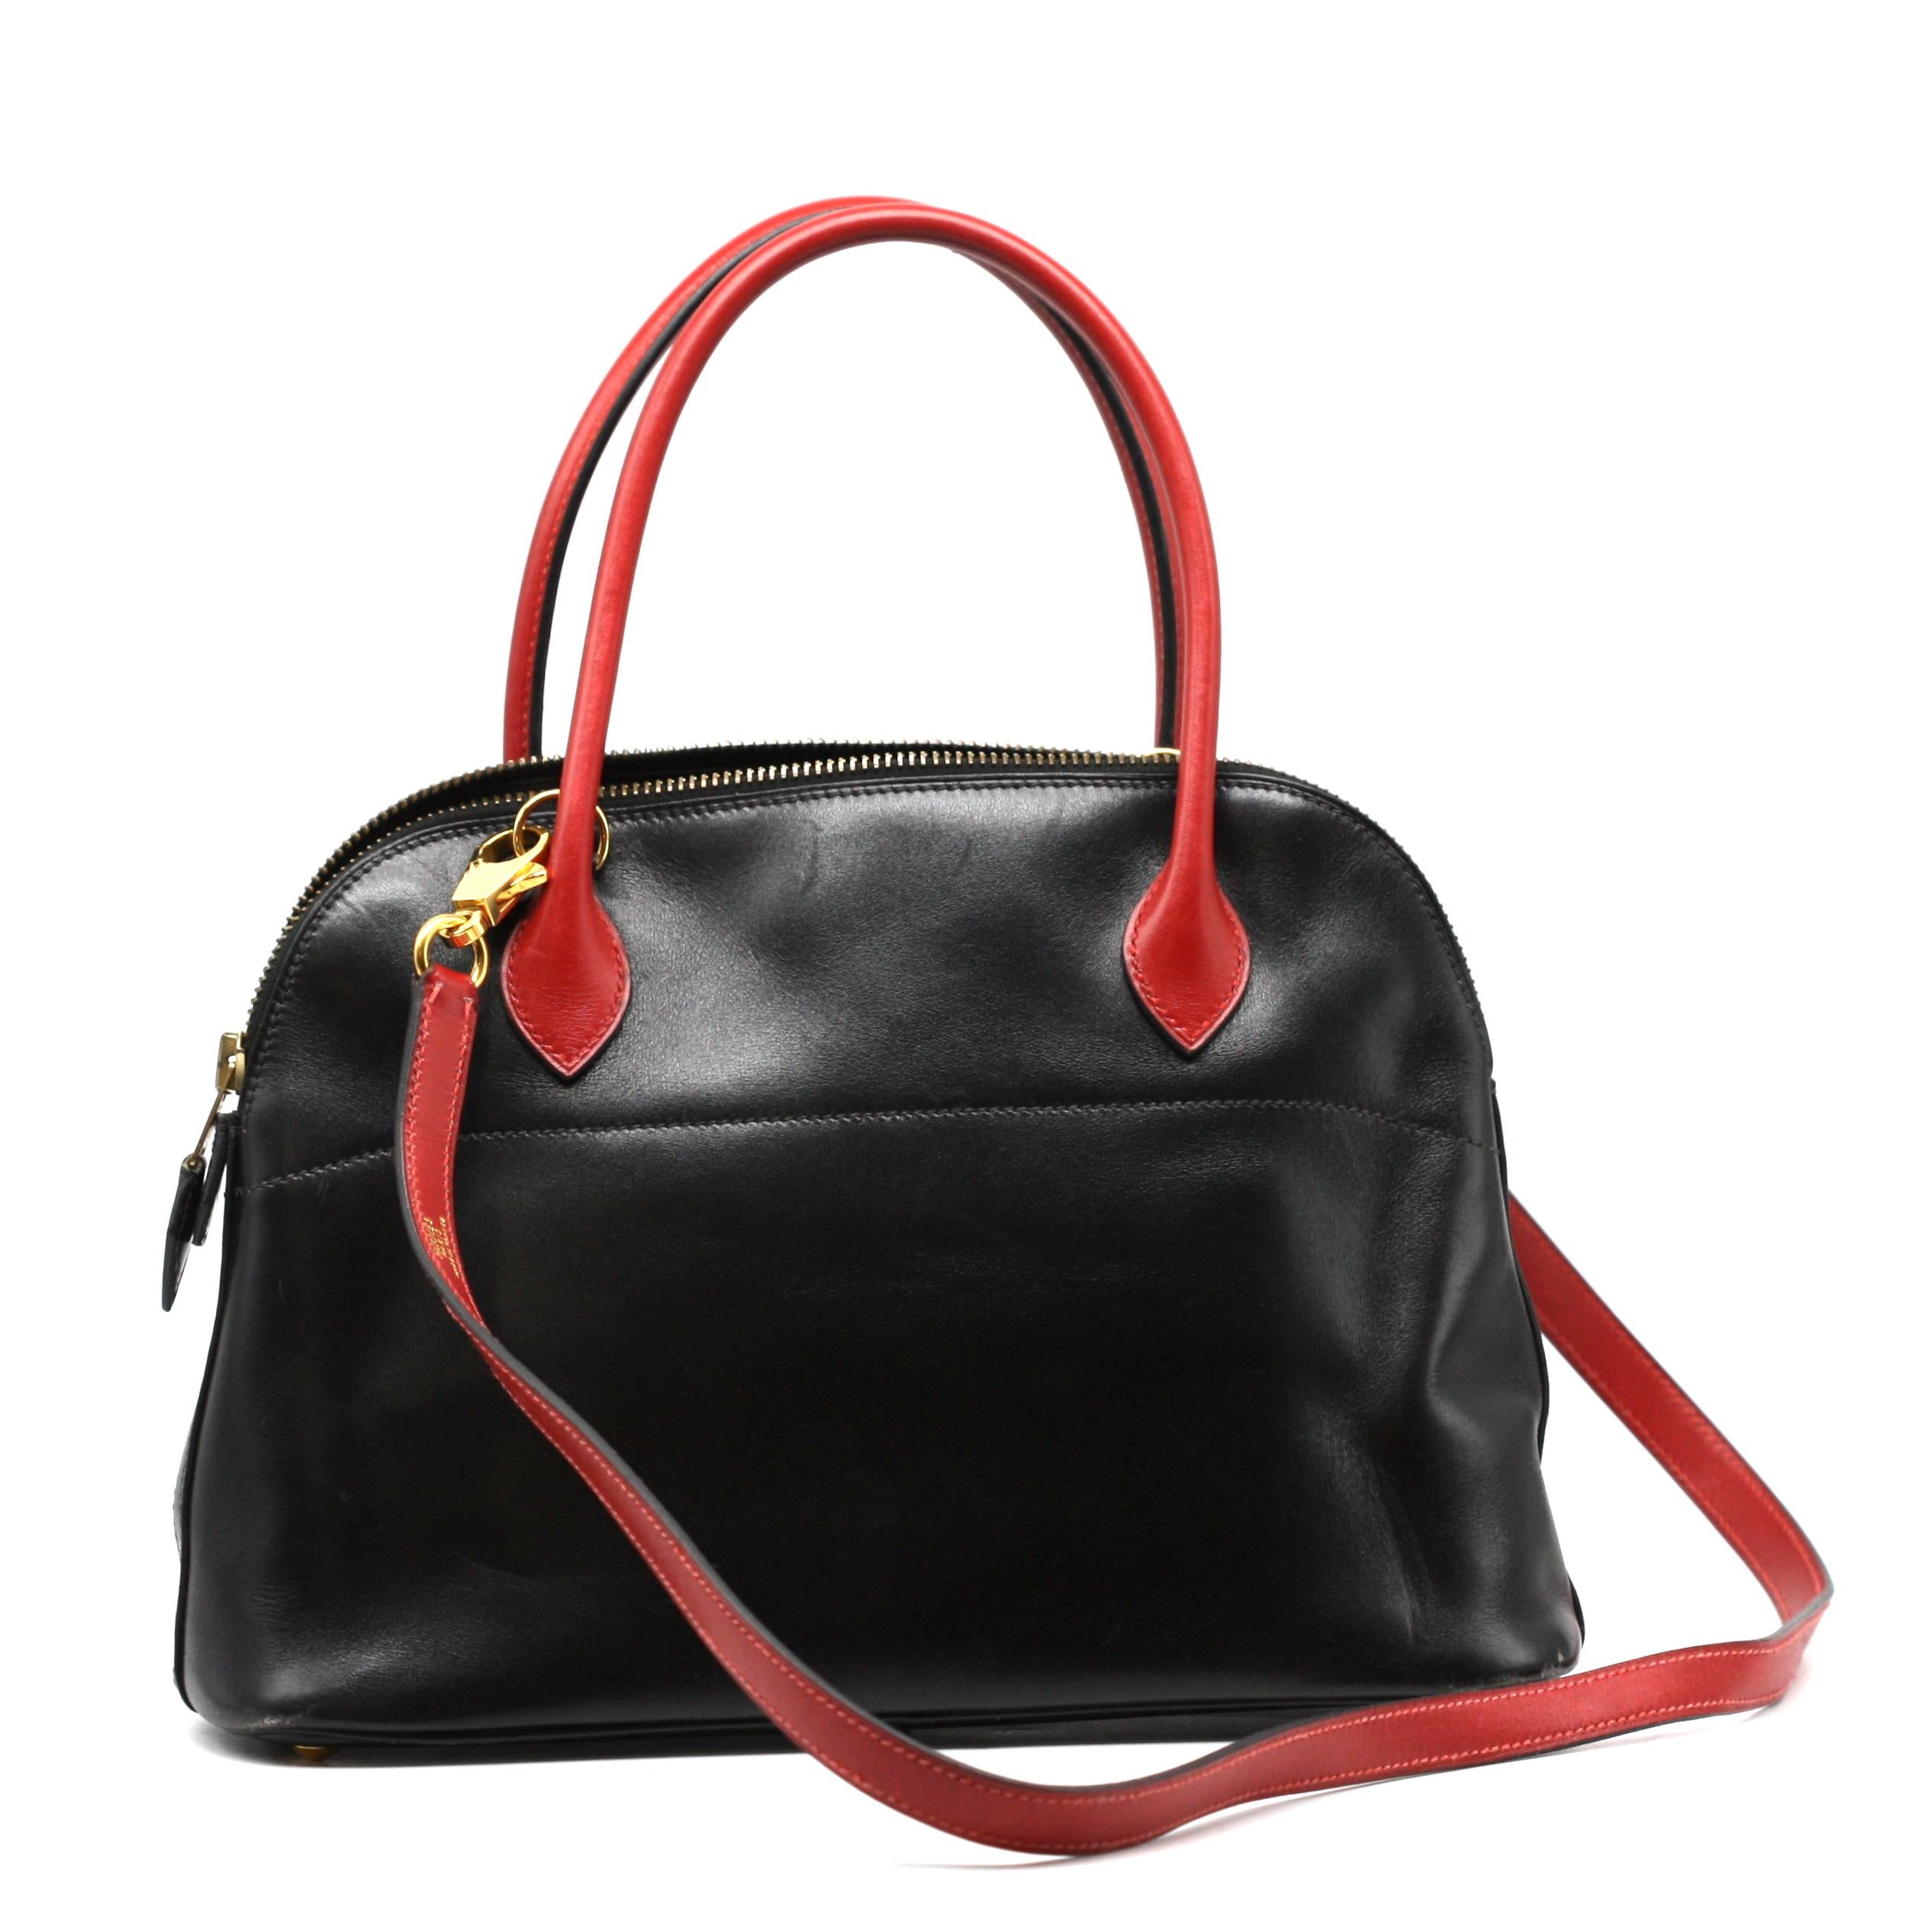 

Hermes Box Calf Black and Red Leather Bolide Handbag
approximate size:
11 inches to top of handle, 7